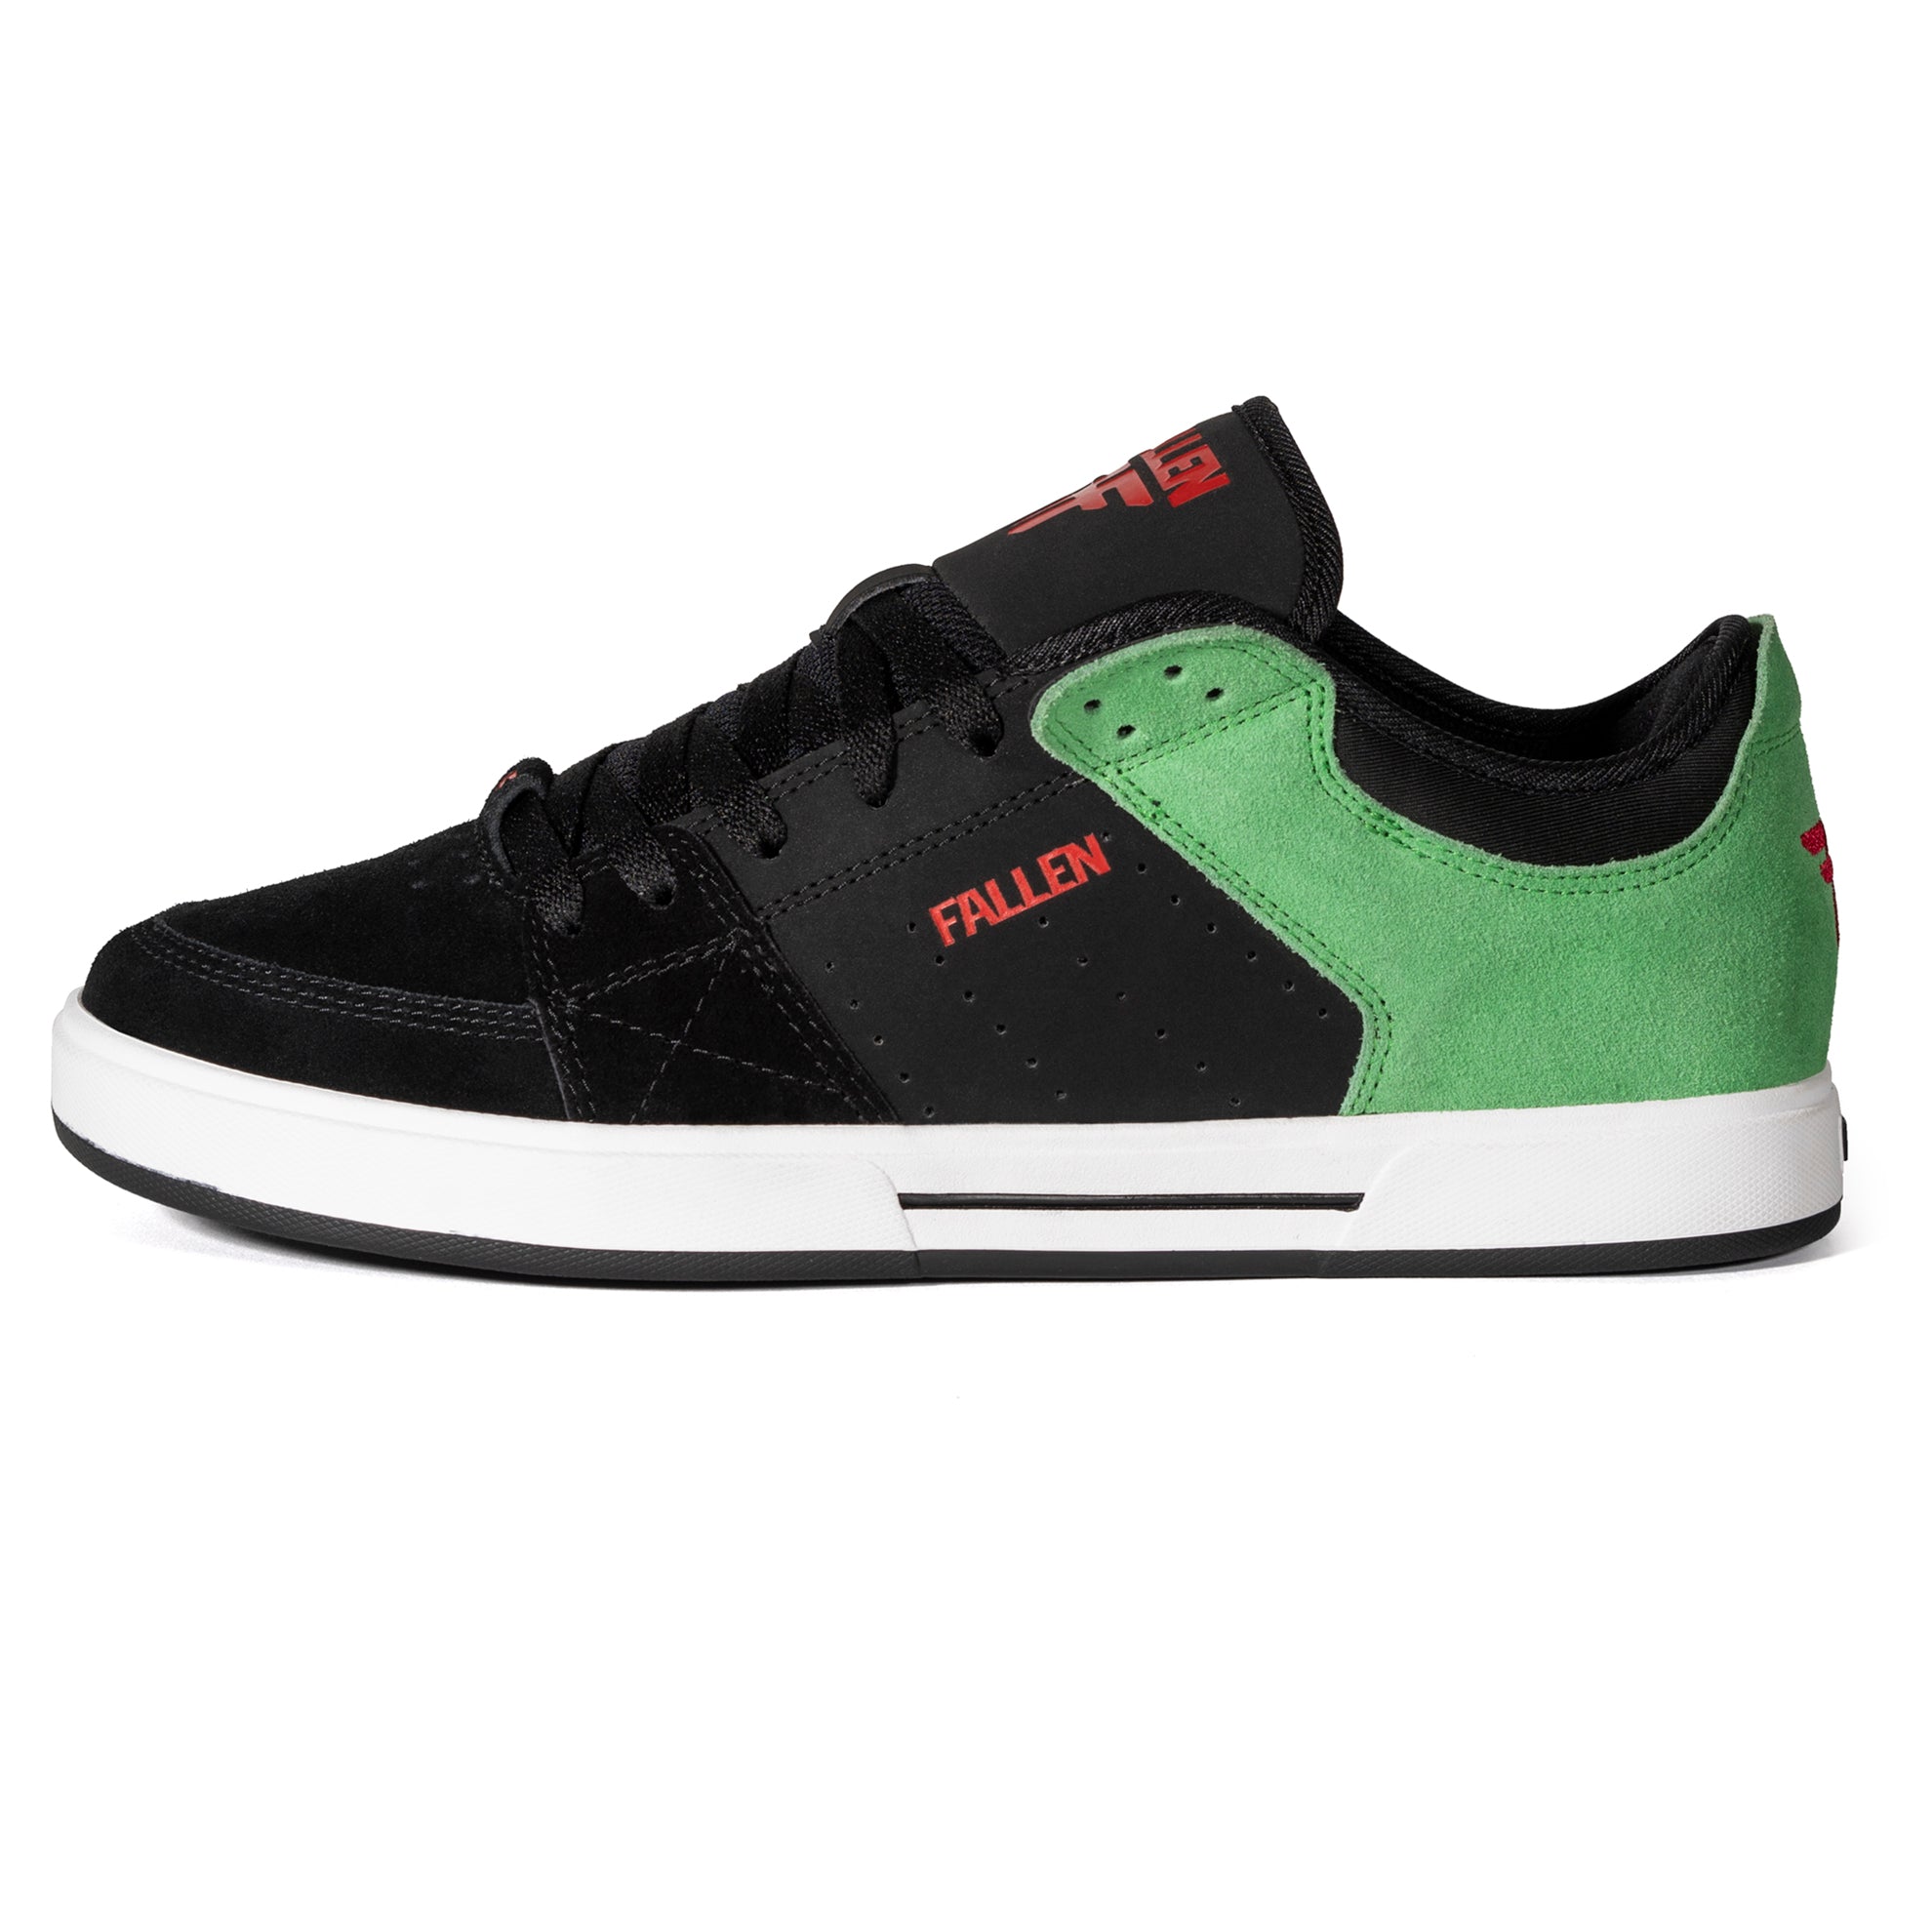 Trooper True Fit Black/Lime/Red - Chris Cole - Cupsole